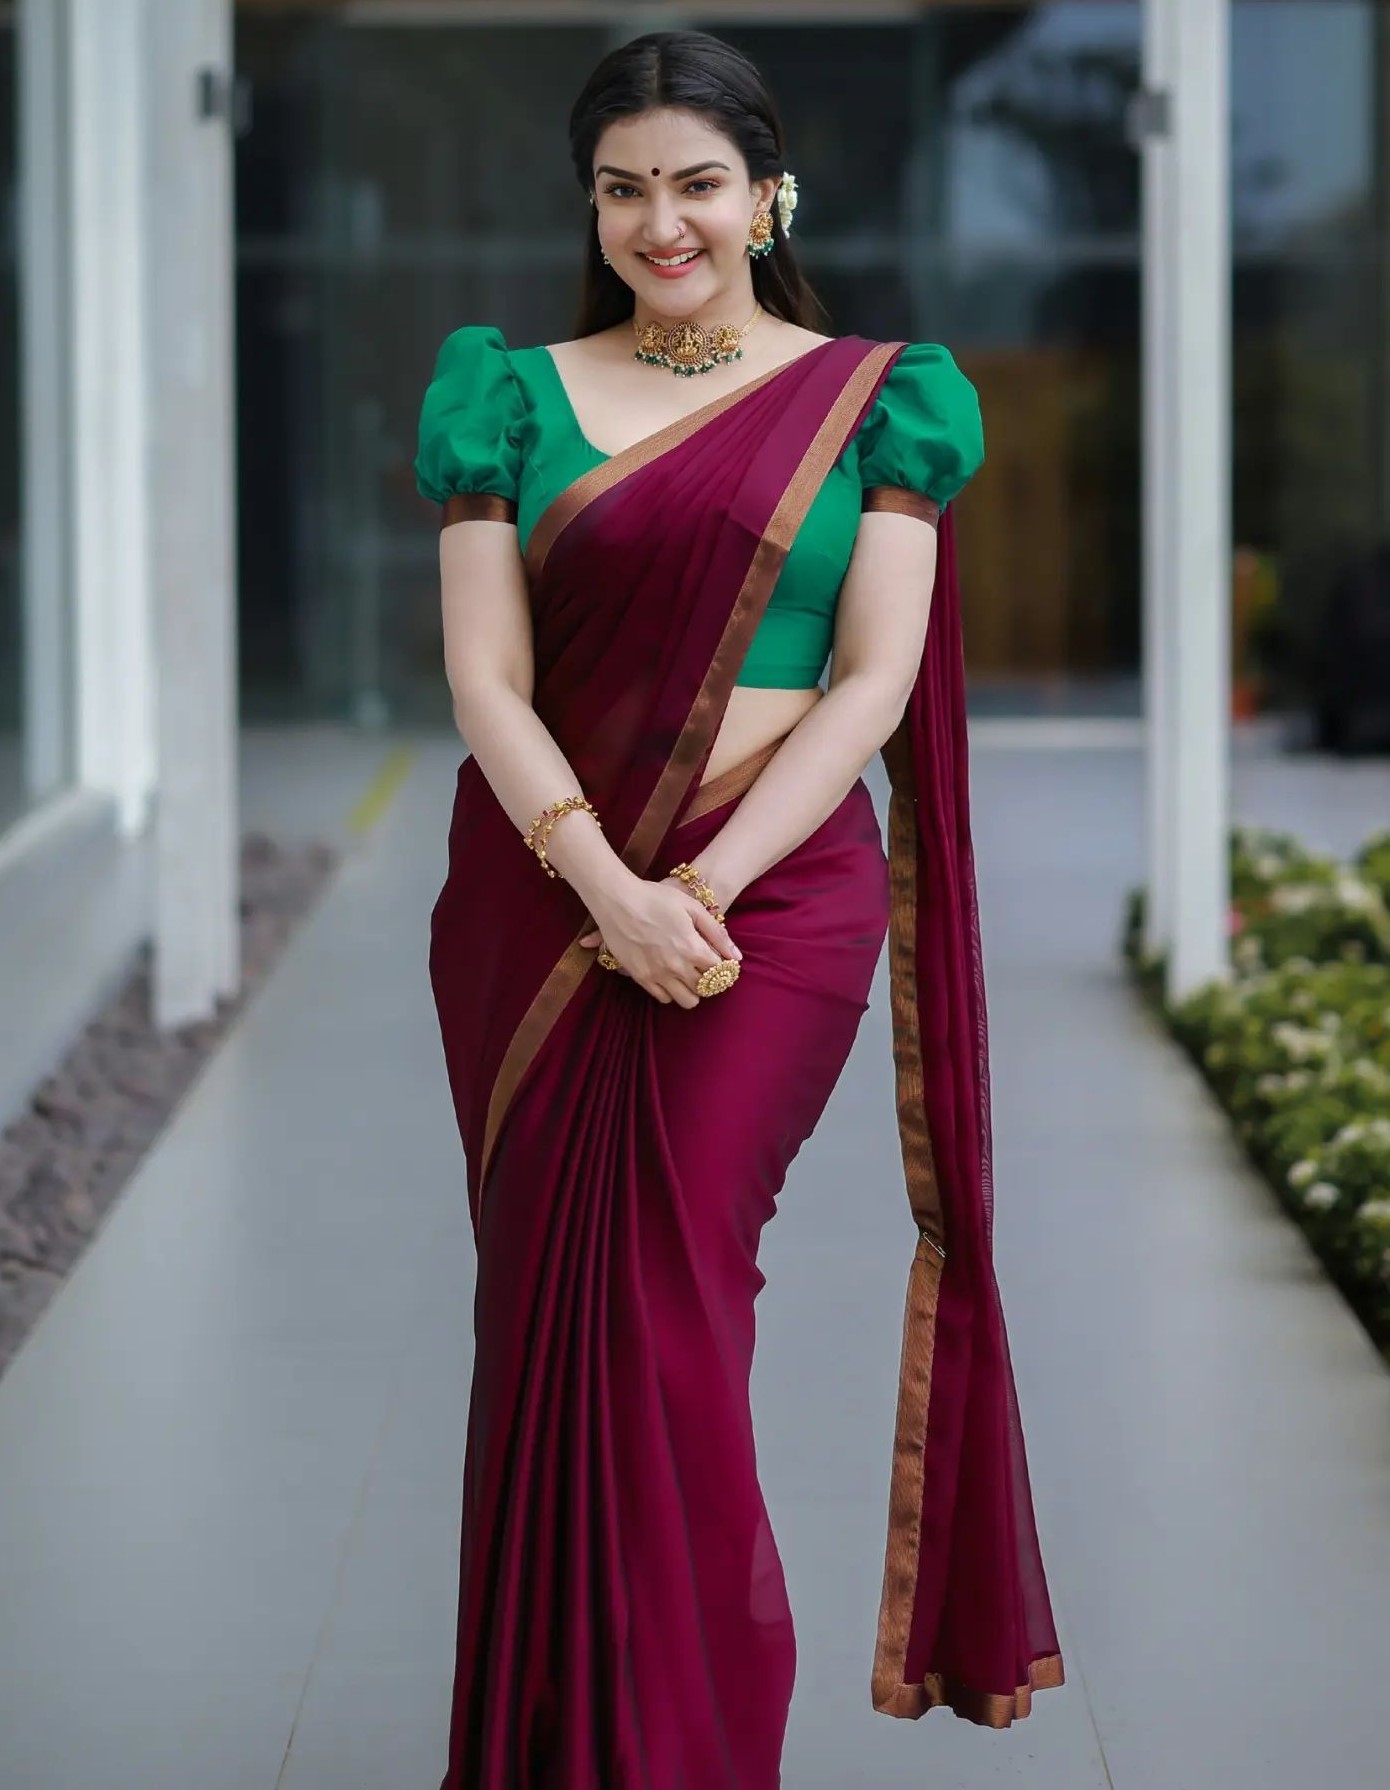 Vasnudhara Kashyap Xxx Photo - Honey Rose In Traditional Outfits And Looks - K4 Fashion